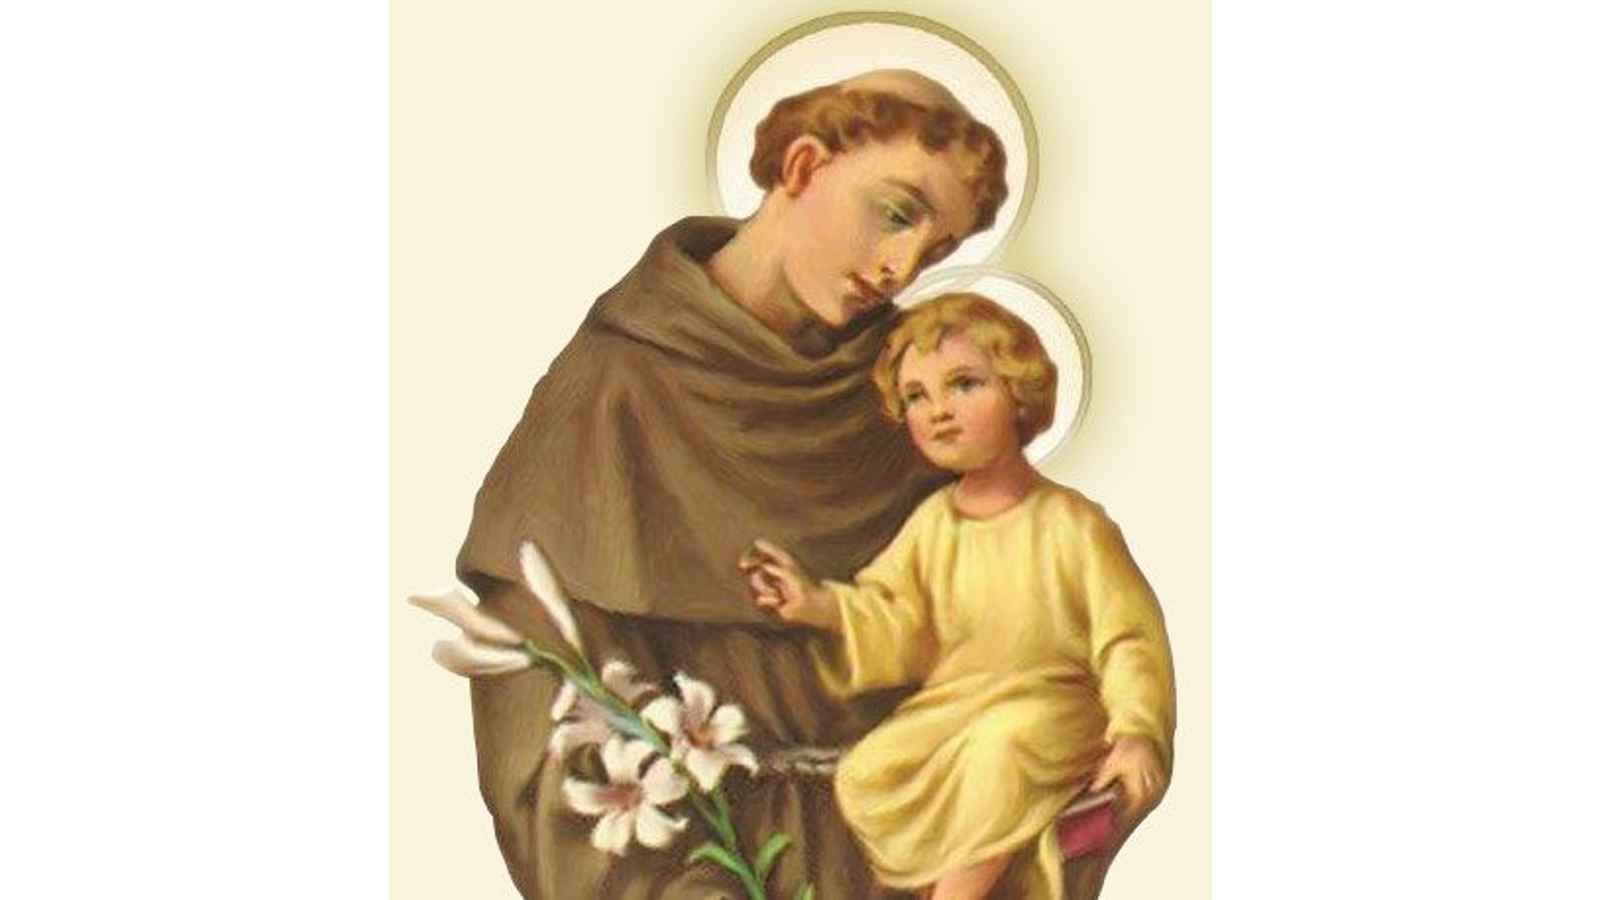 Feast of St. Anthony 2023: Date, History, Facts about St. Anthony